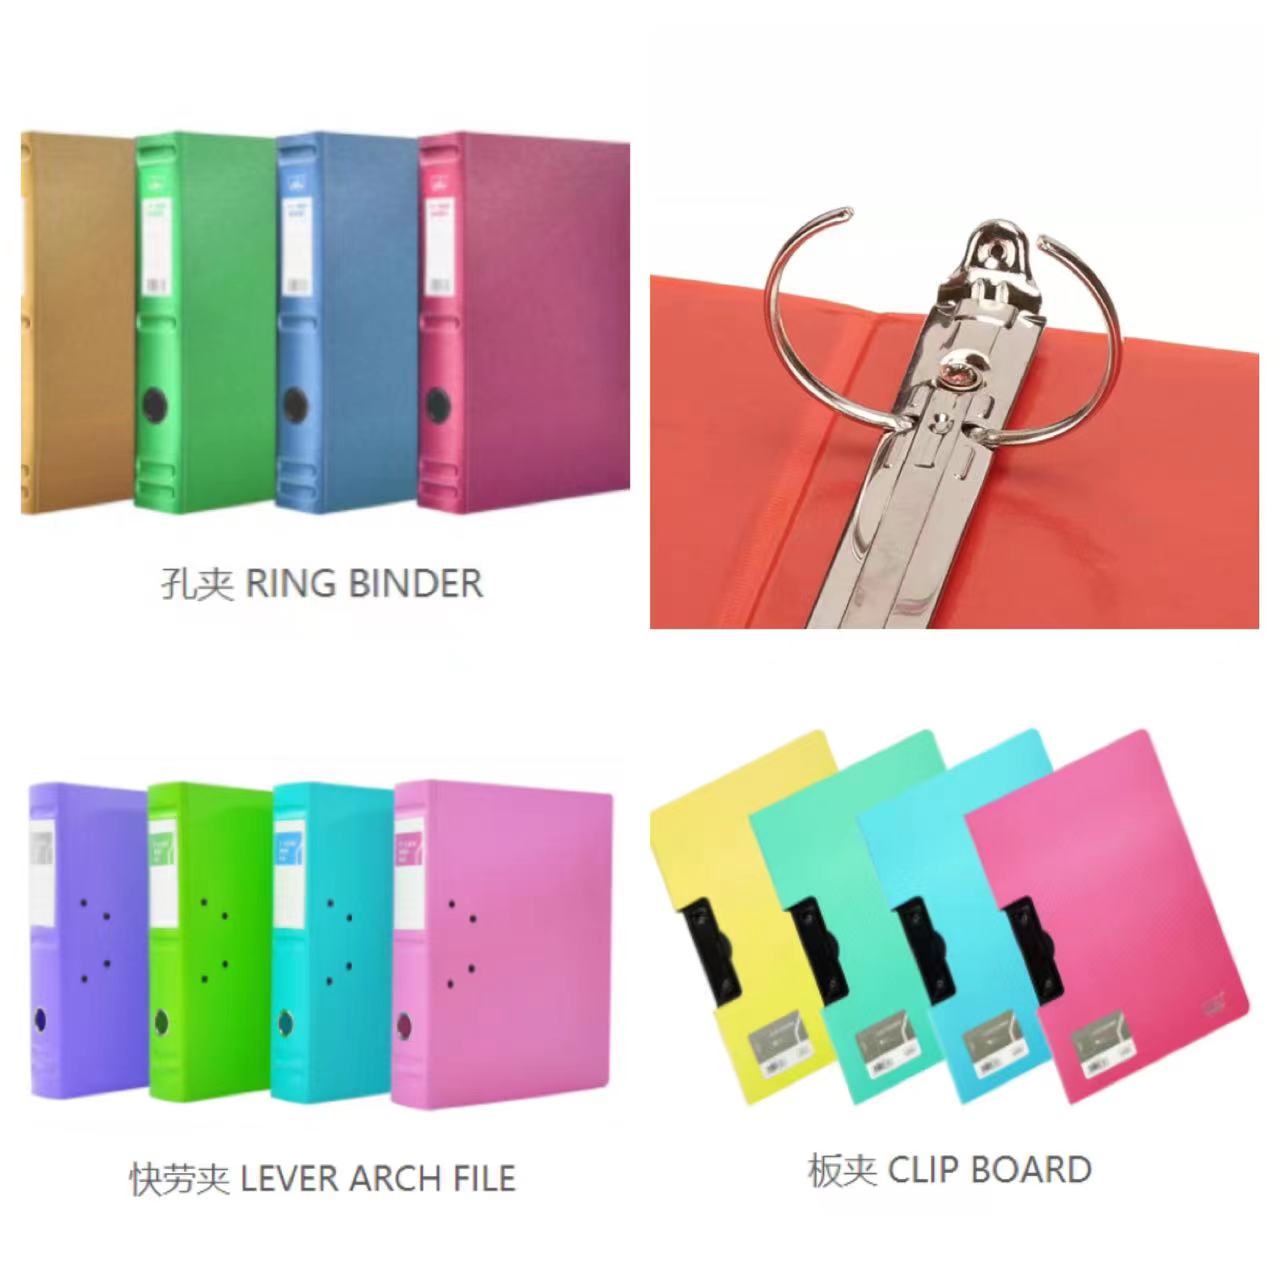 Ring binder & Lever arch file